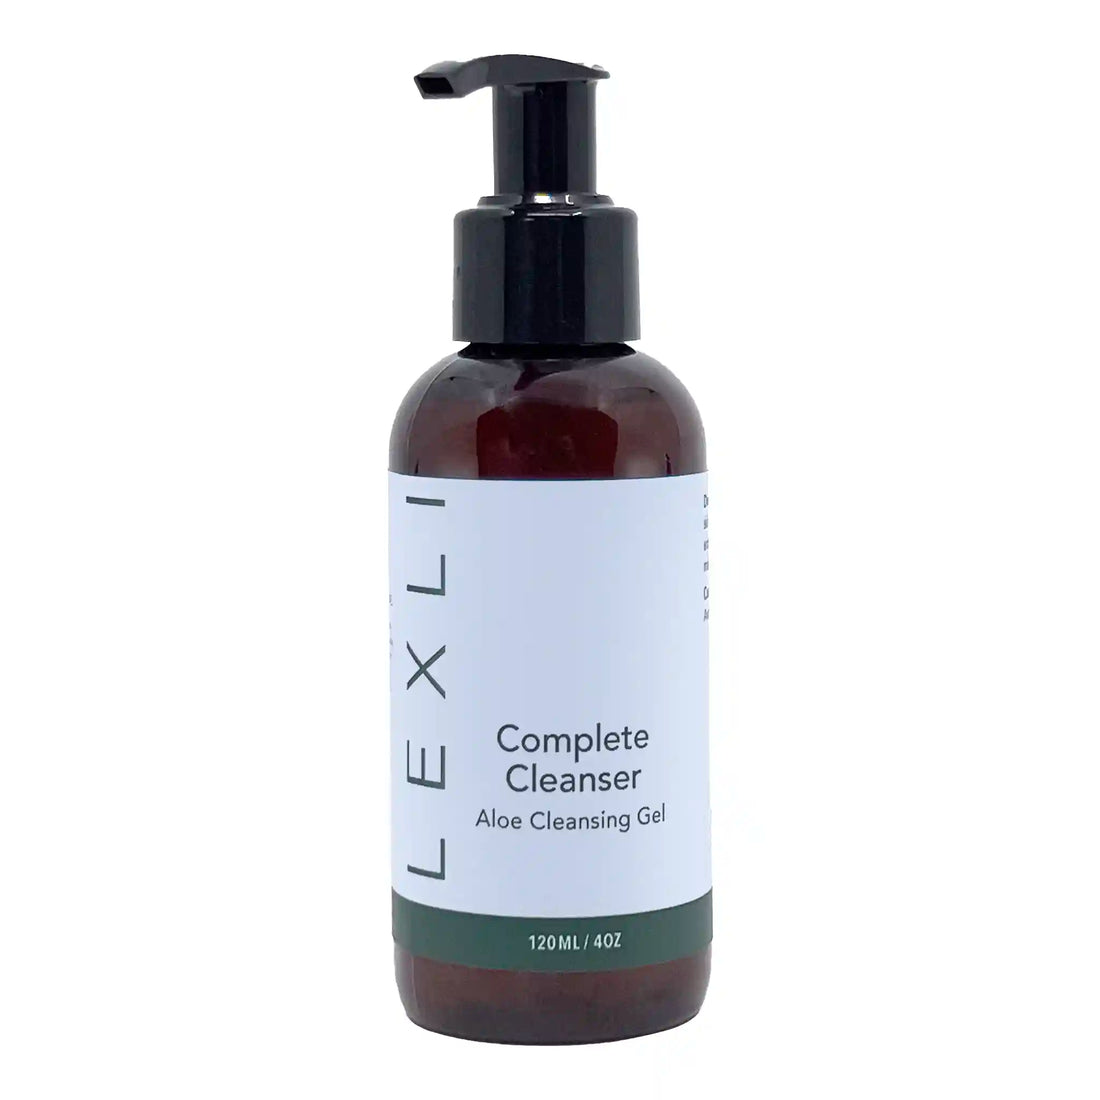 4 oz bottle with blue label, Complete Cleanser